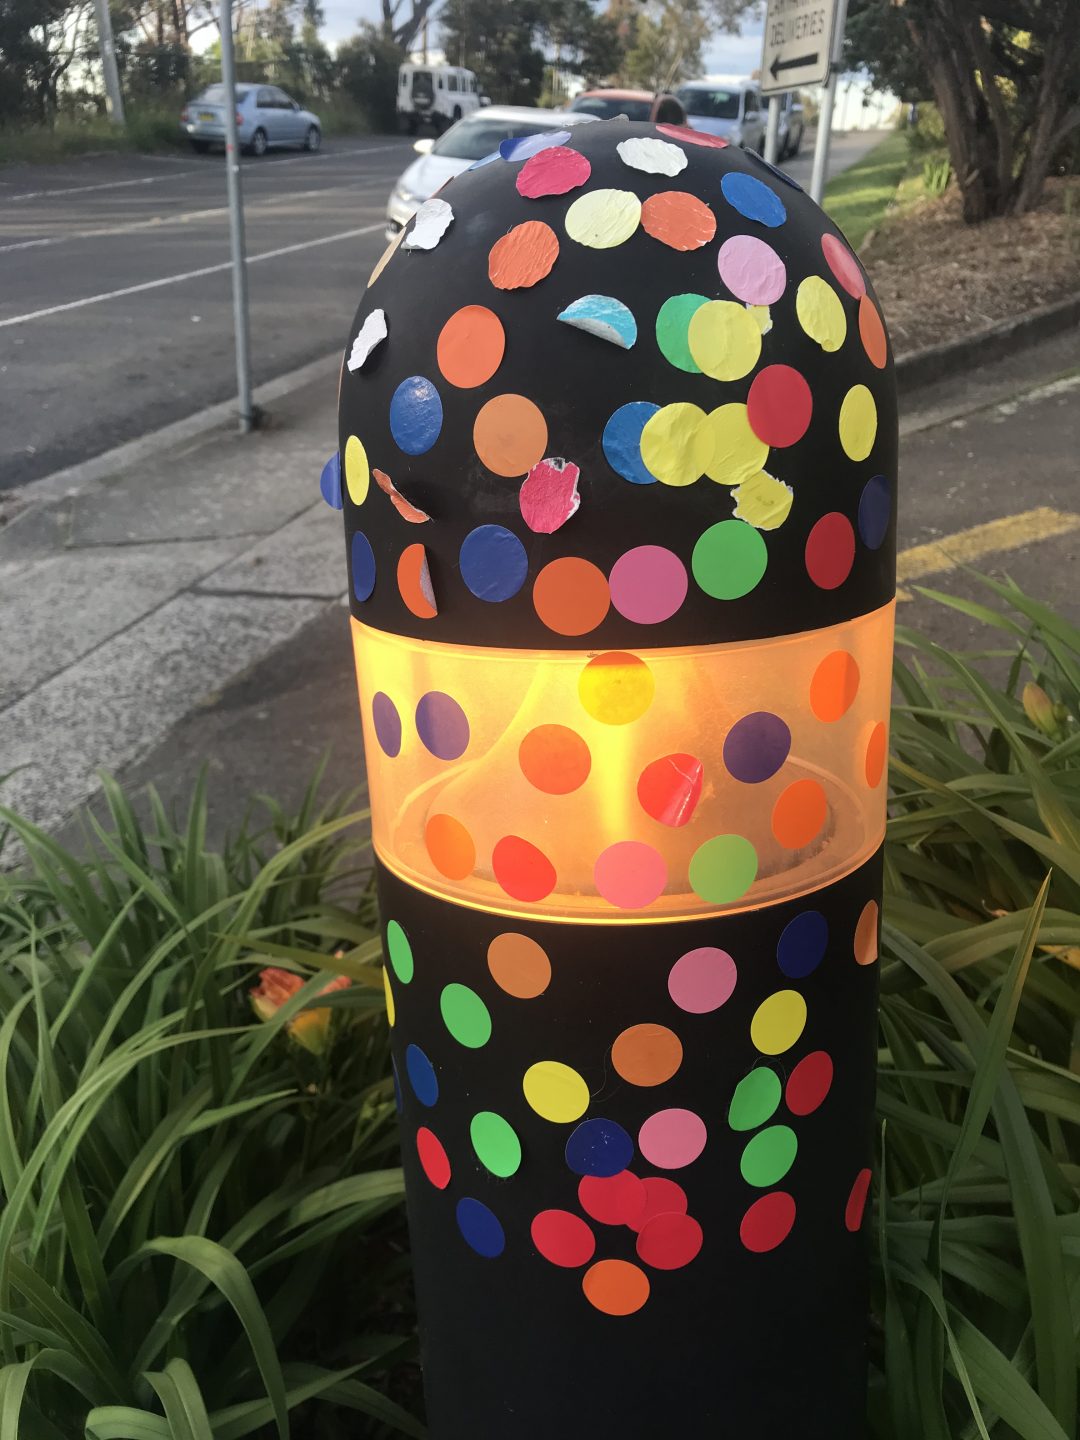 A bollard covered in coloured stickers.